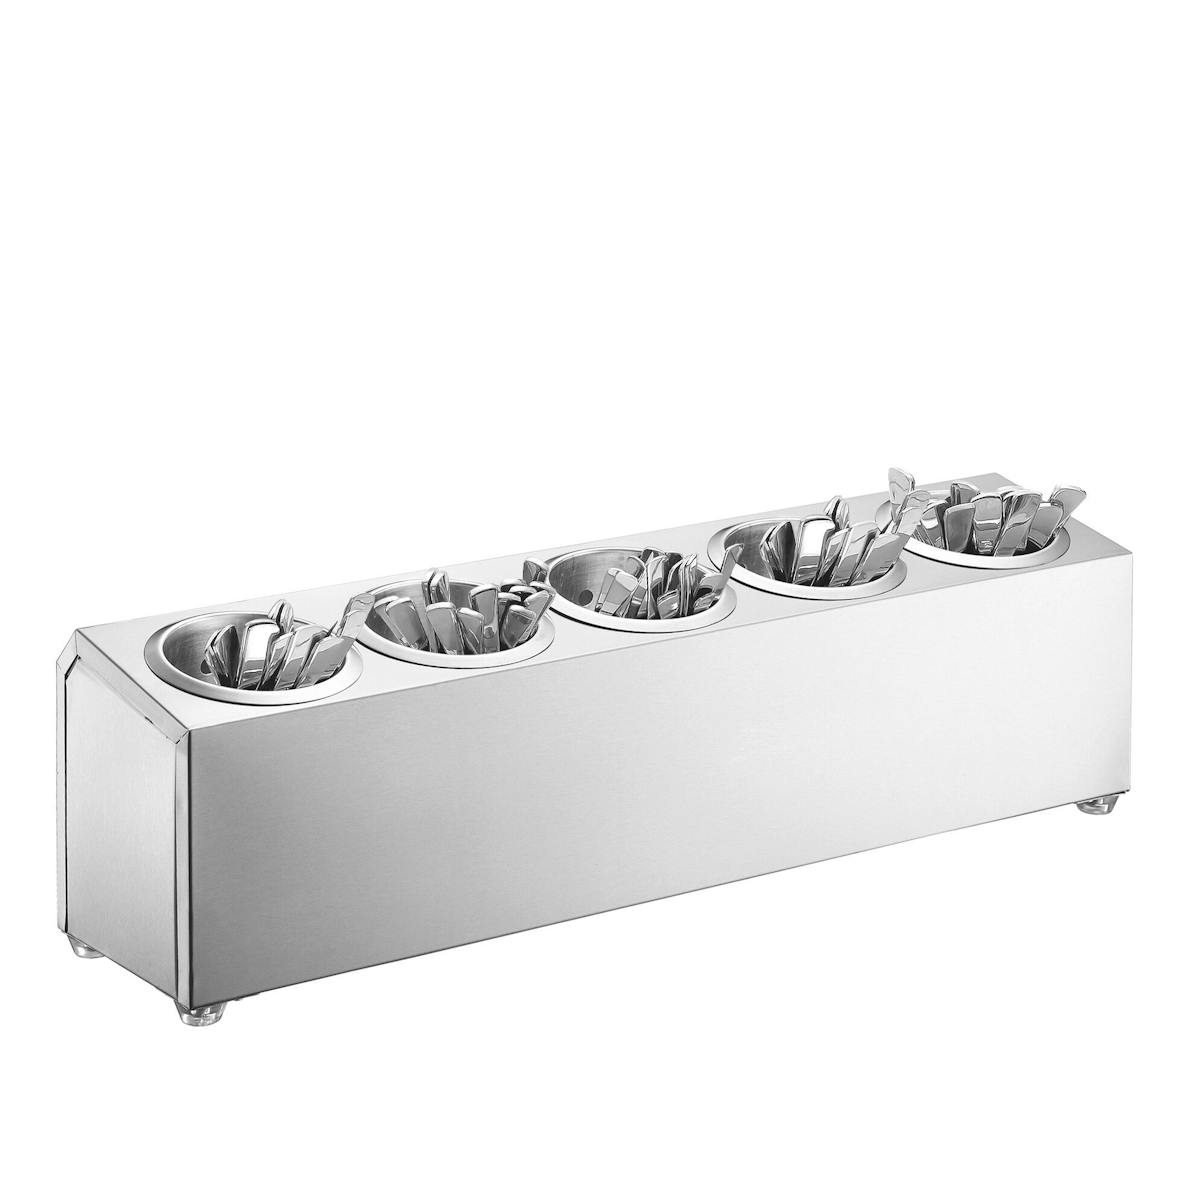 Cutlery tray - for 5 cutlery holders	